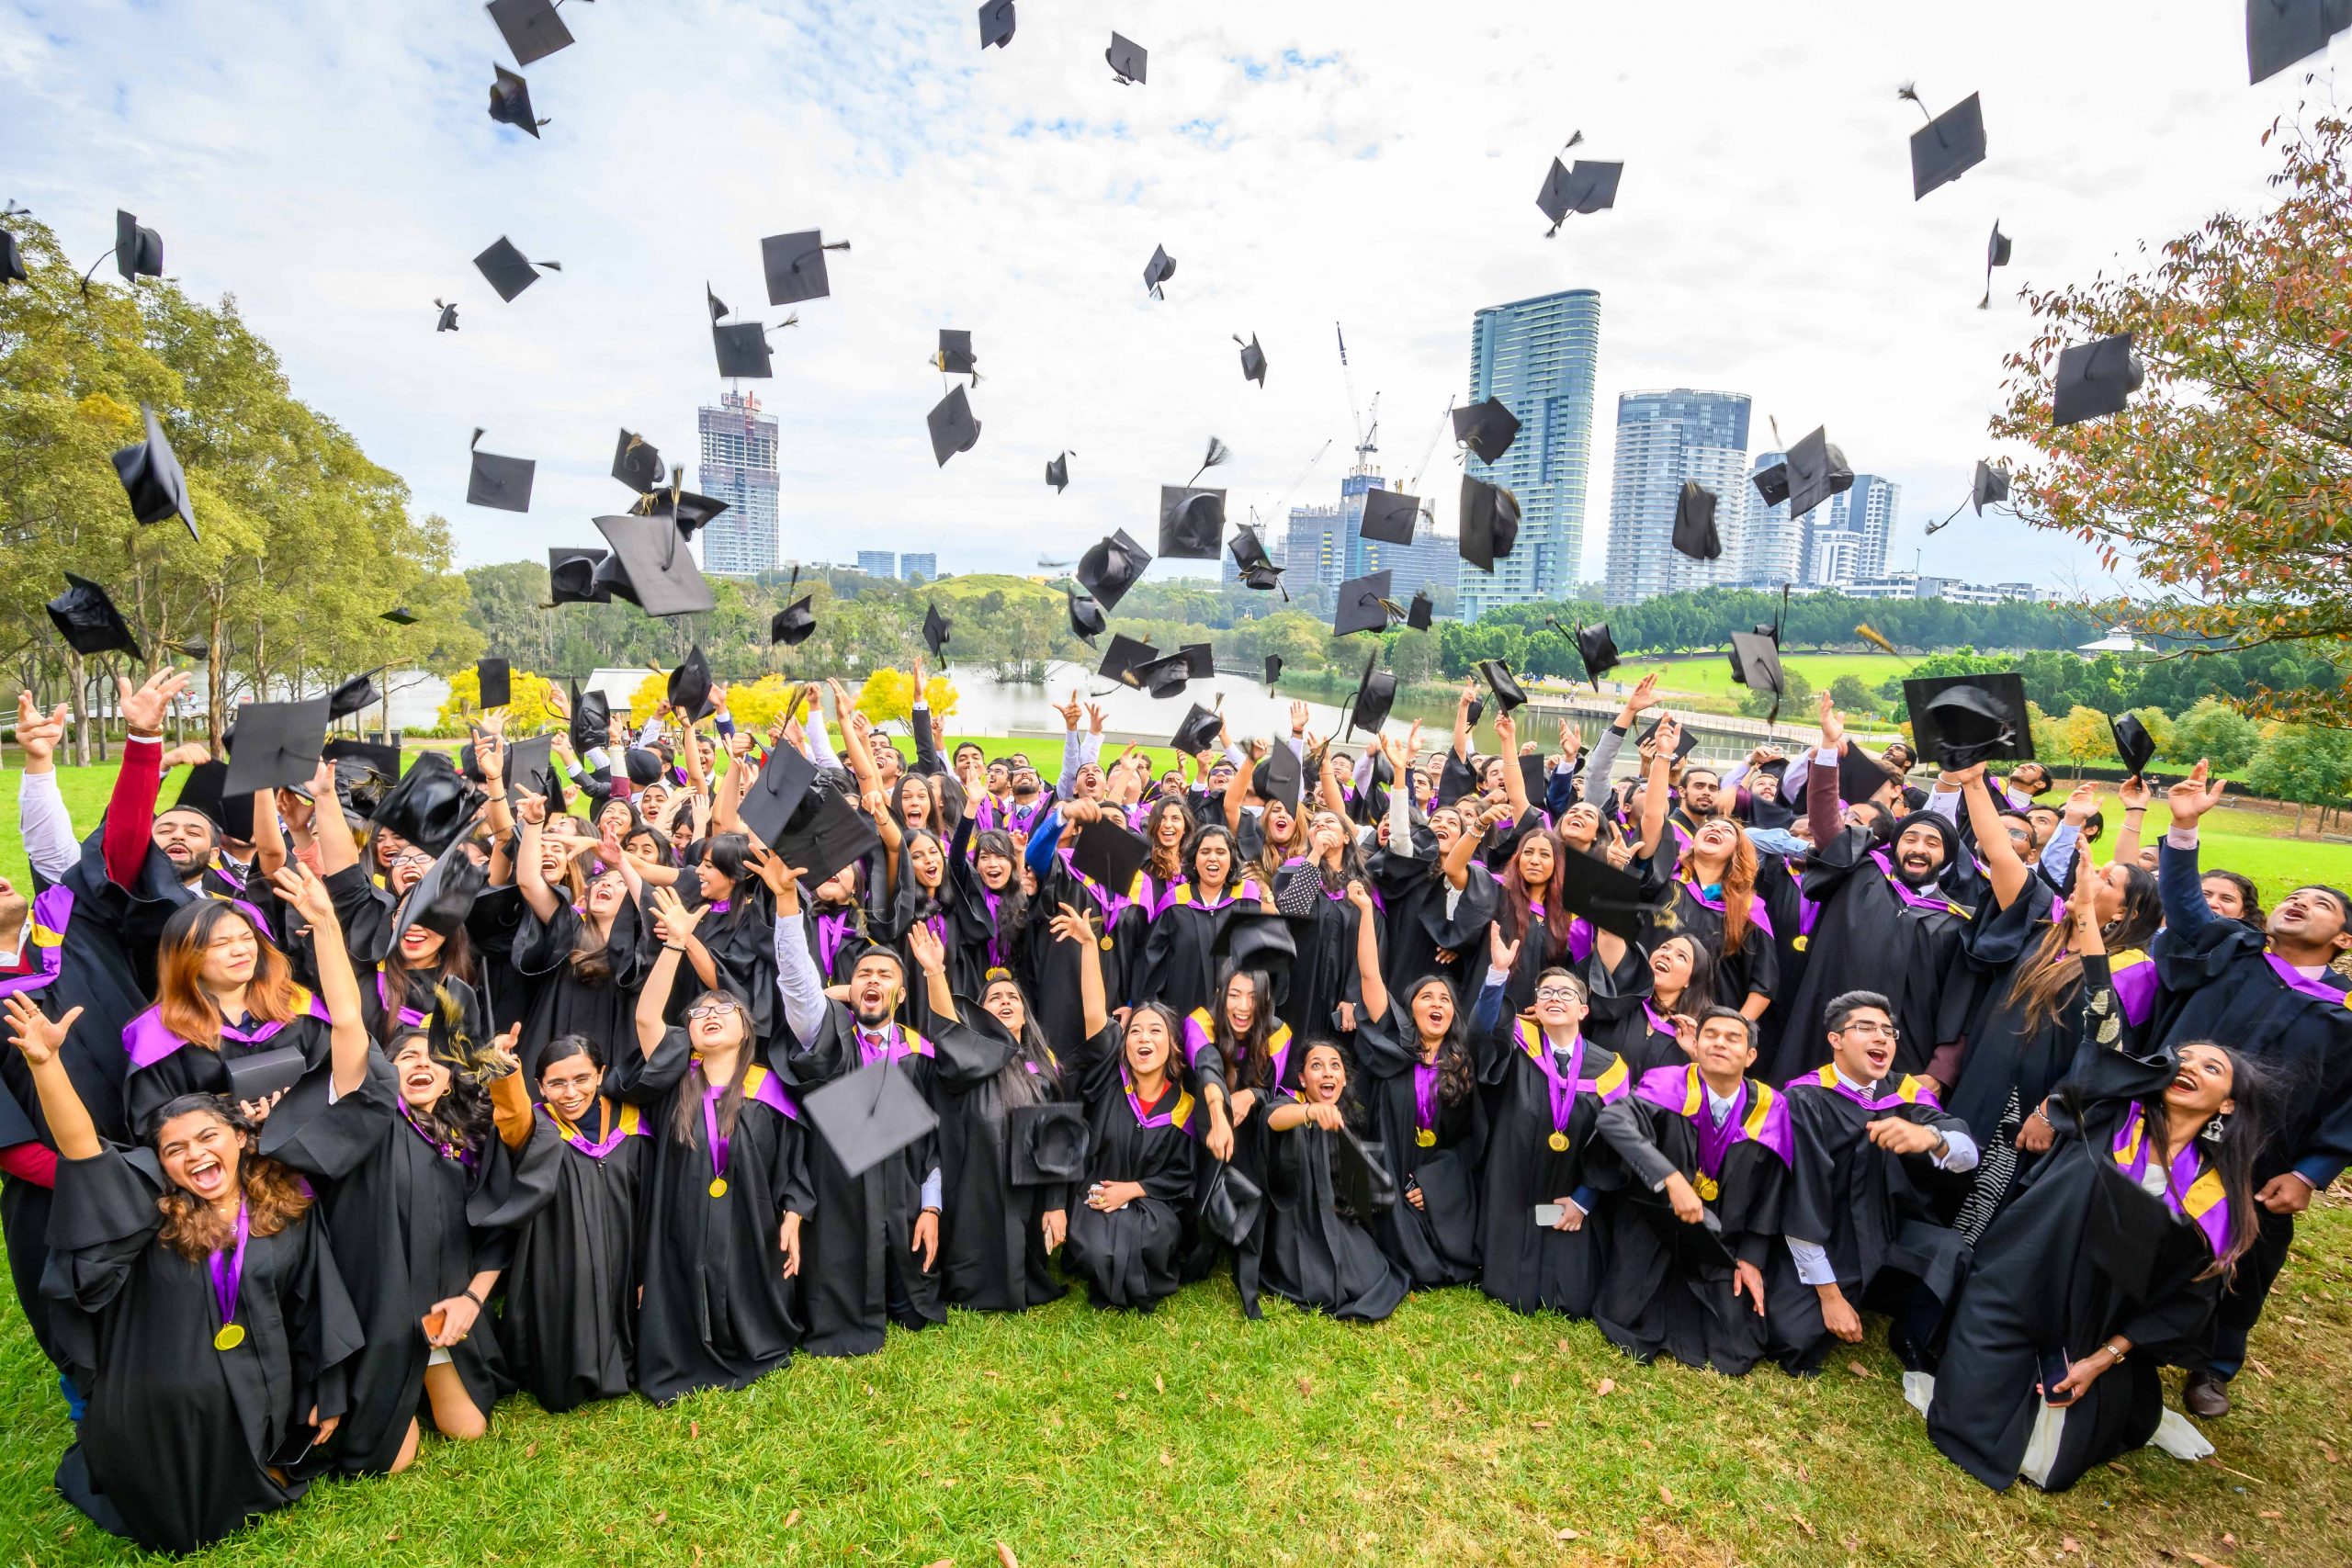 AUSTRALIA EMERGES AS THE TOP EMPLOYMENT LOCATION FOR SP JAIN’SUNDERGRADUATES FROM THE CLASS OF 2019